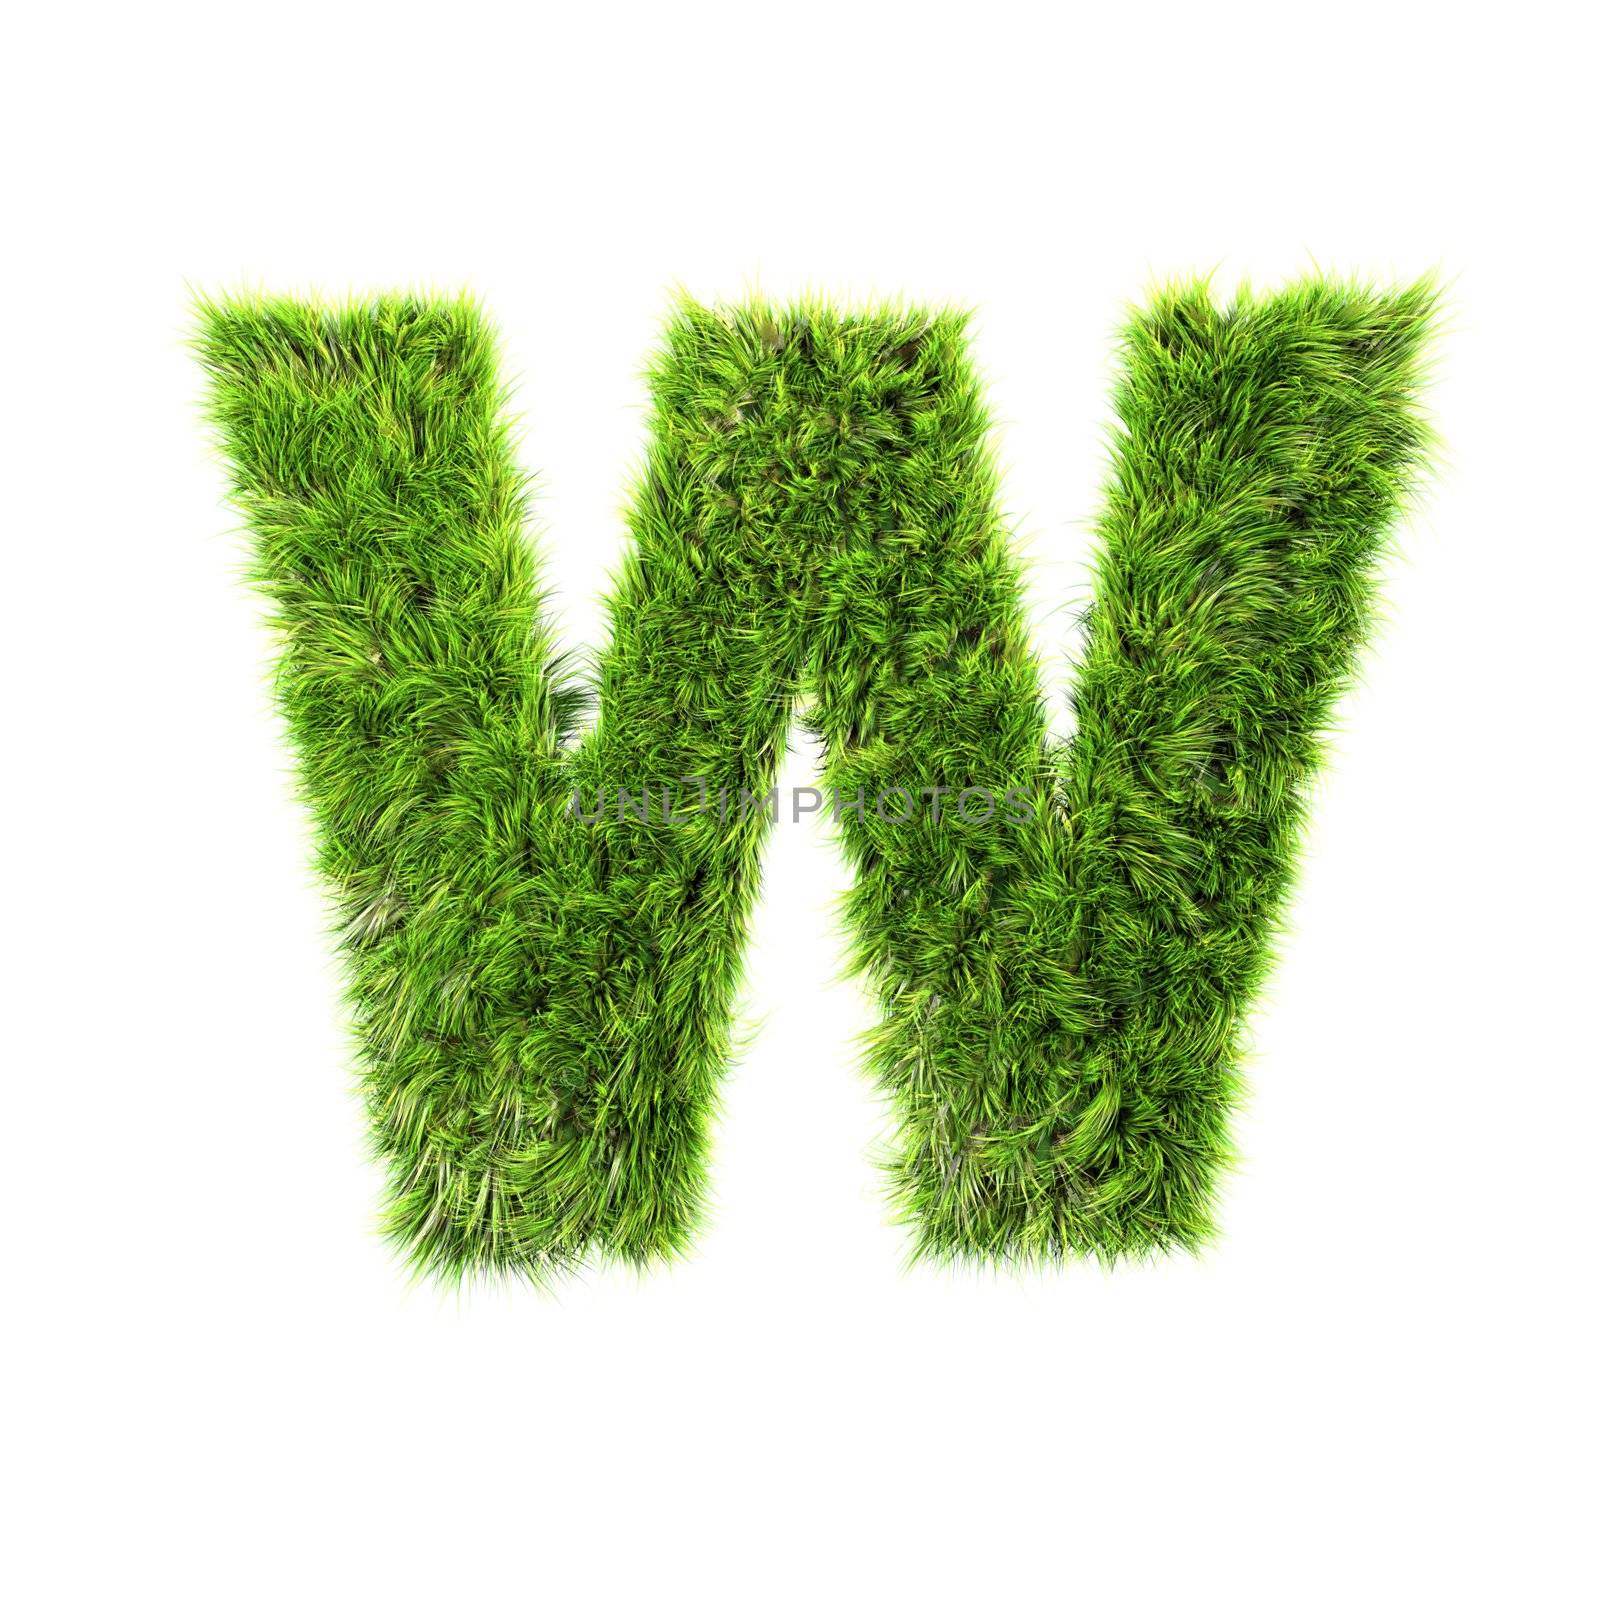 3d grass letter isolated on white background - W by chrisroll